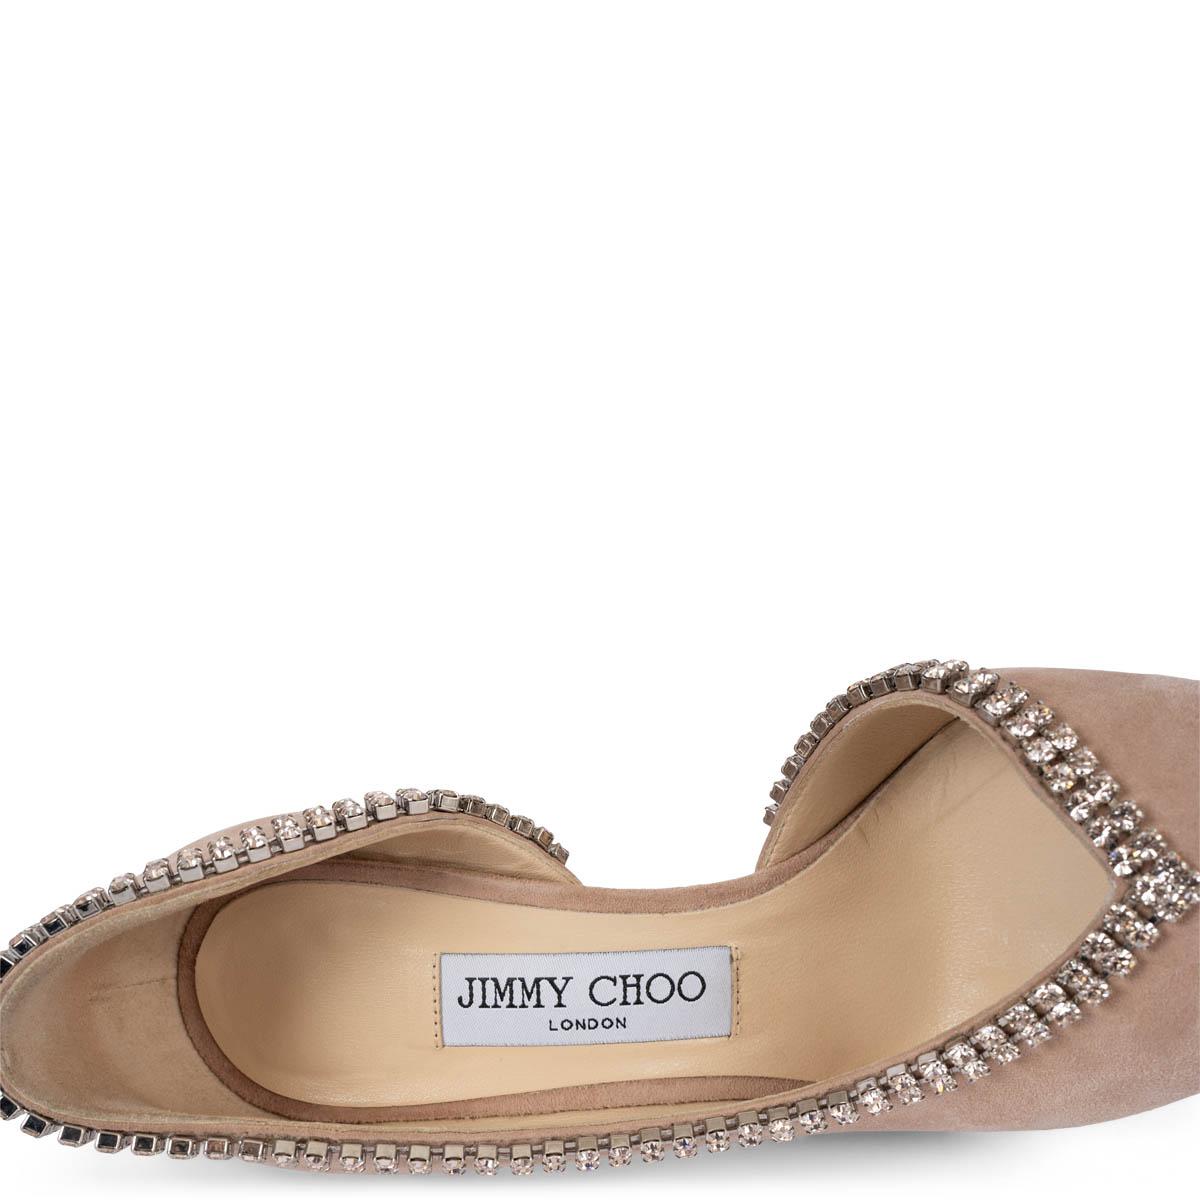 JIMMY CHOO blush pink suede LILIAN 100 CRYSTAL Pumps Shoes 36 For Sale 3